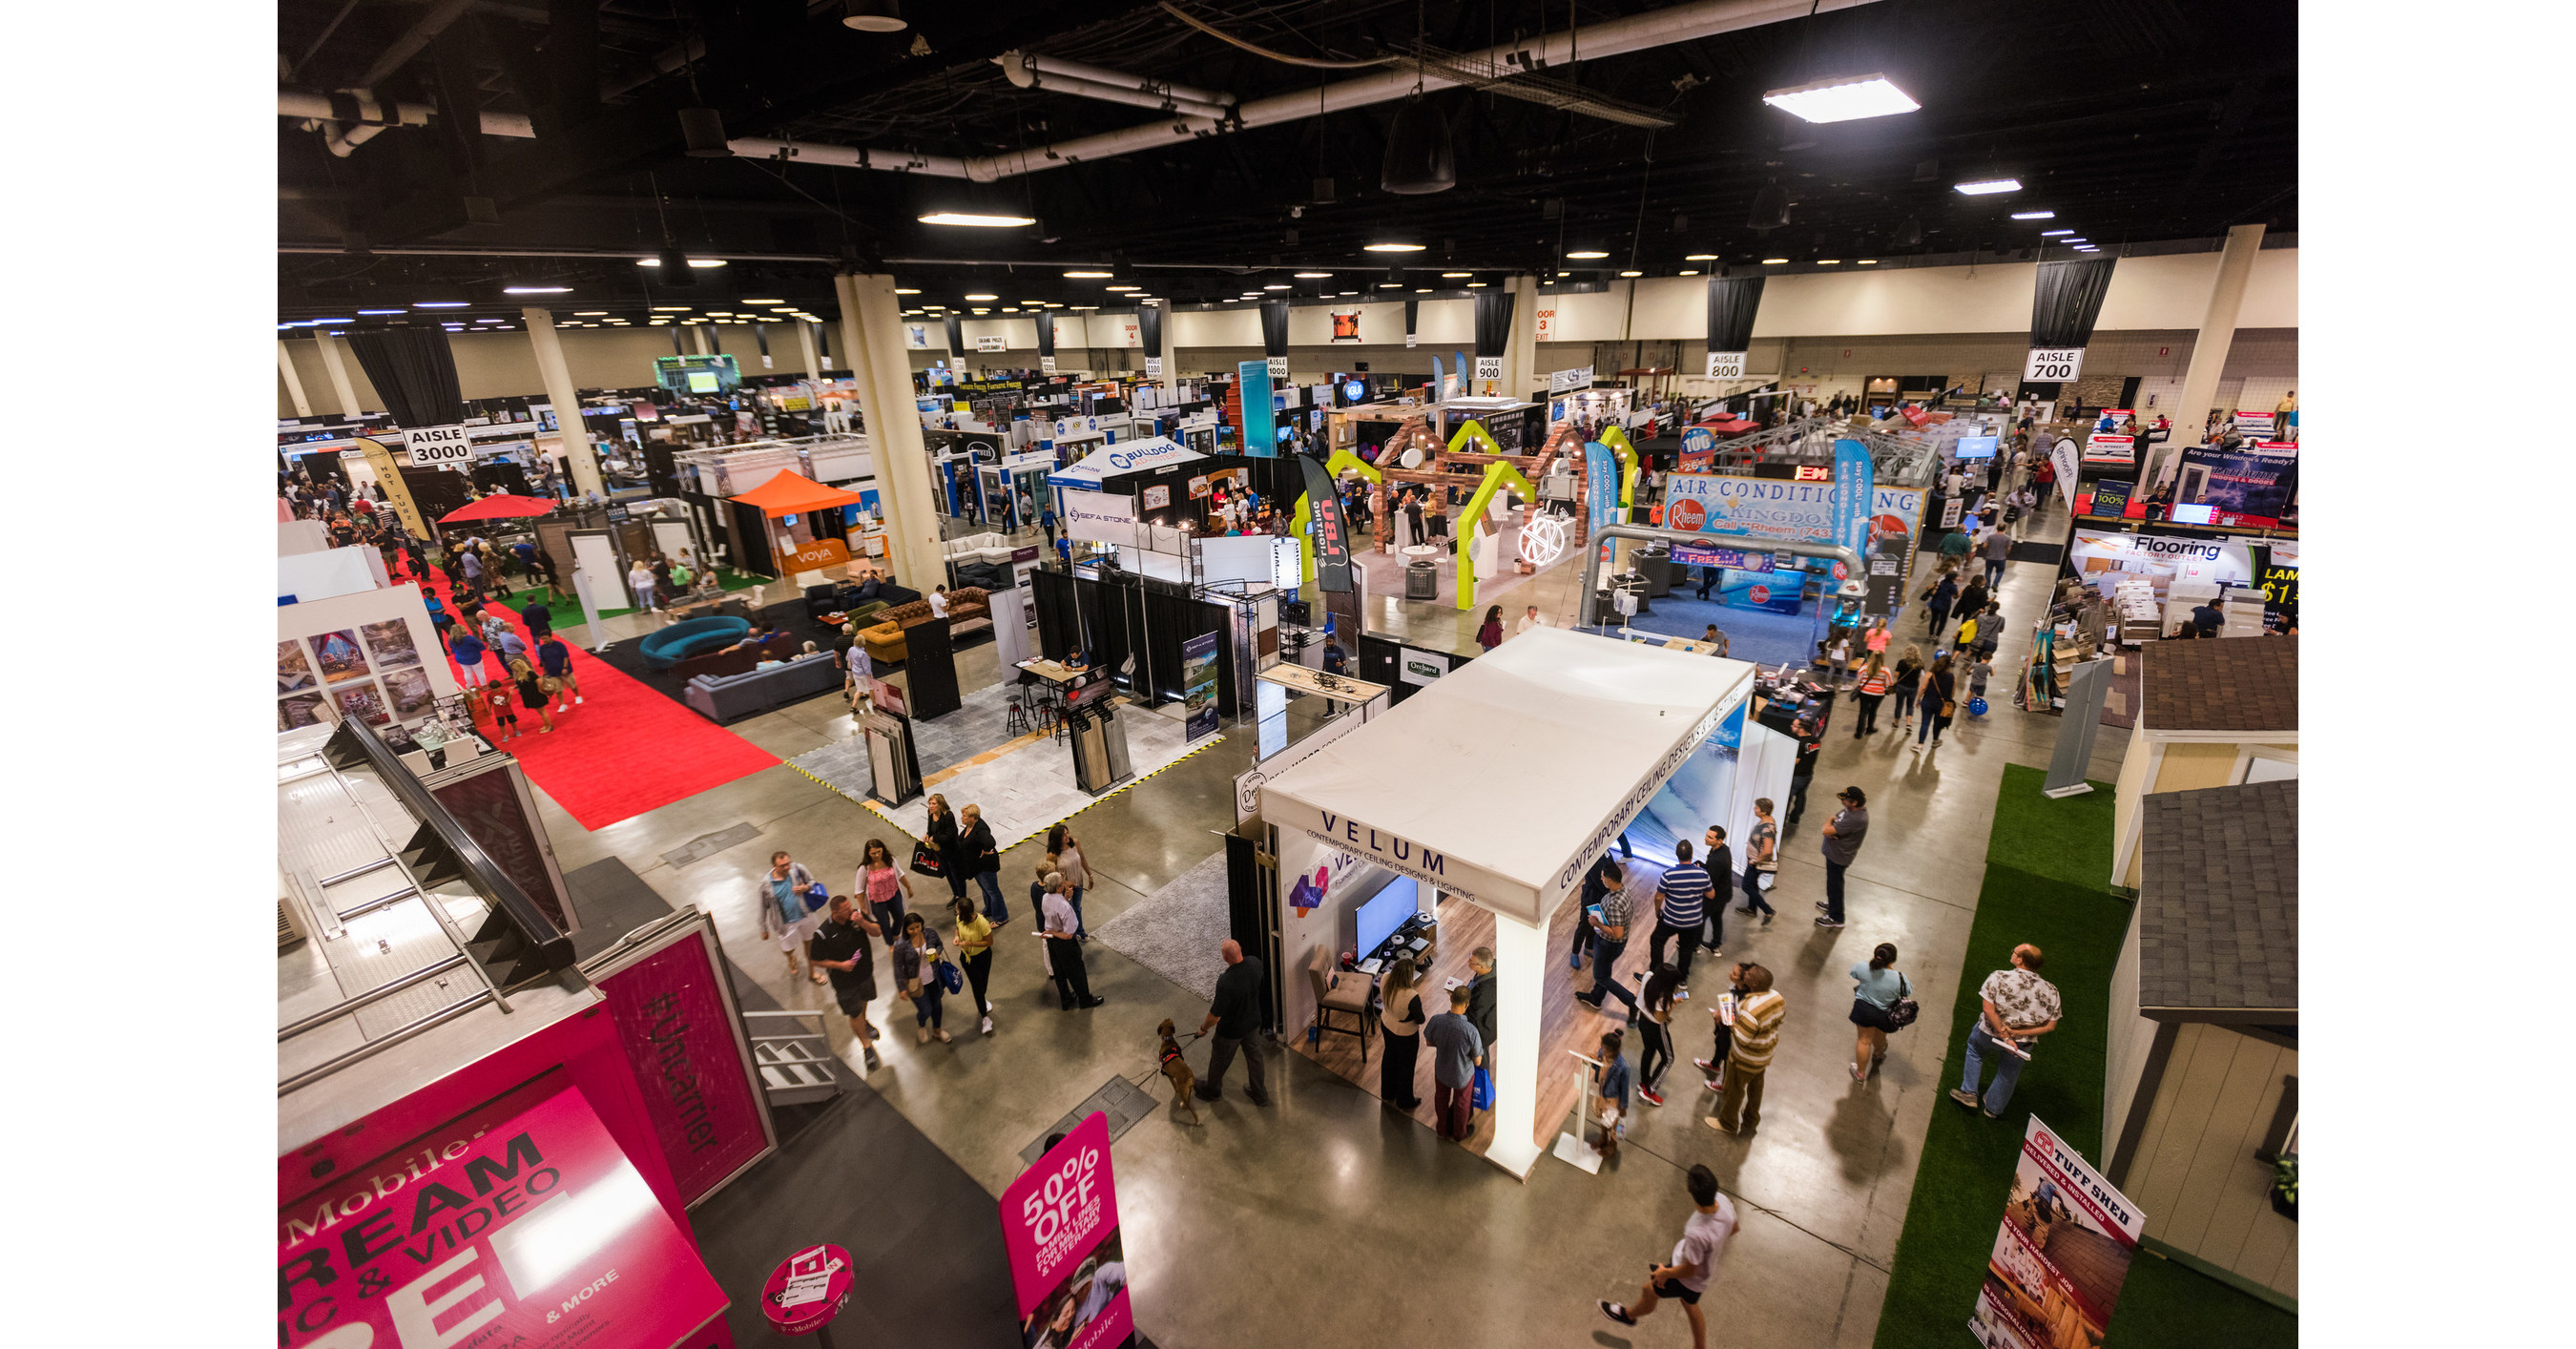 The Home Design and Remodeling Show Pivots to Digital Media Amidst Pandemic